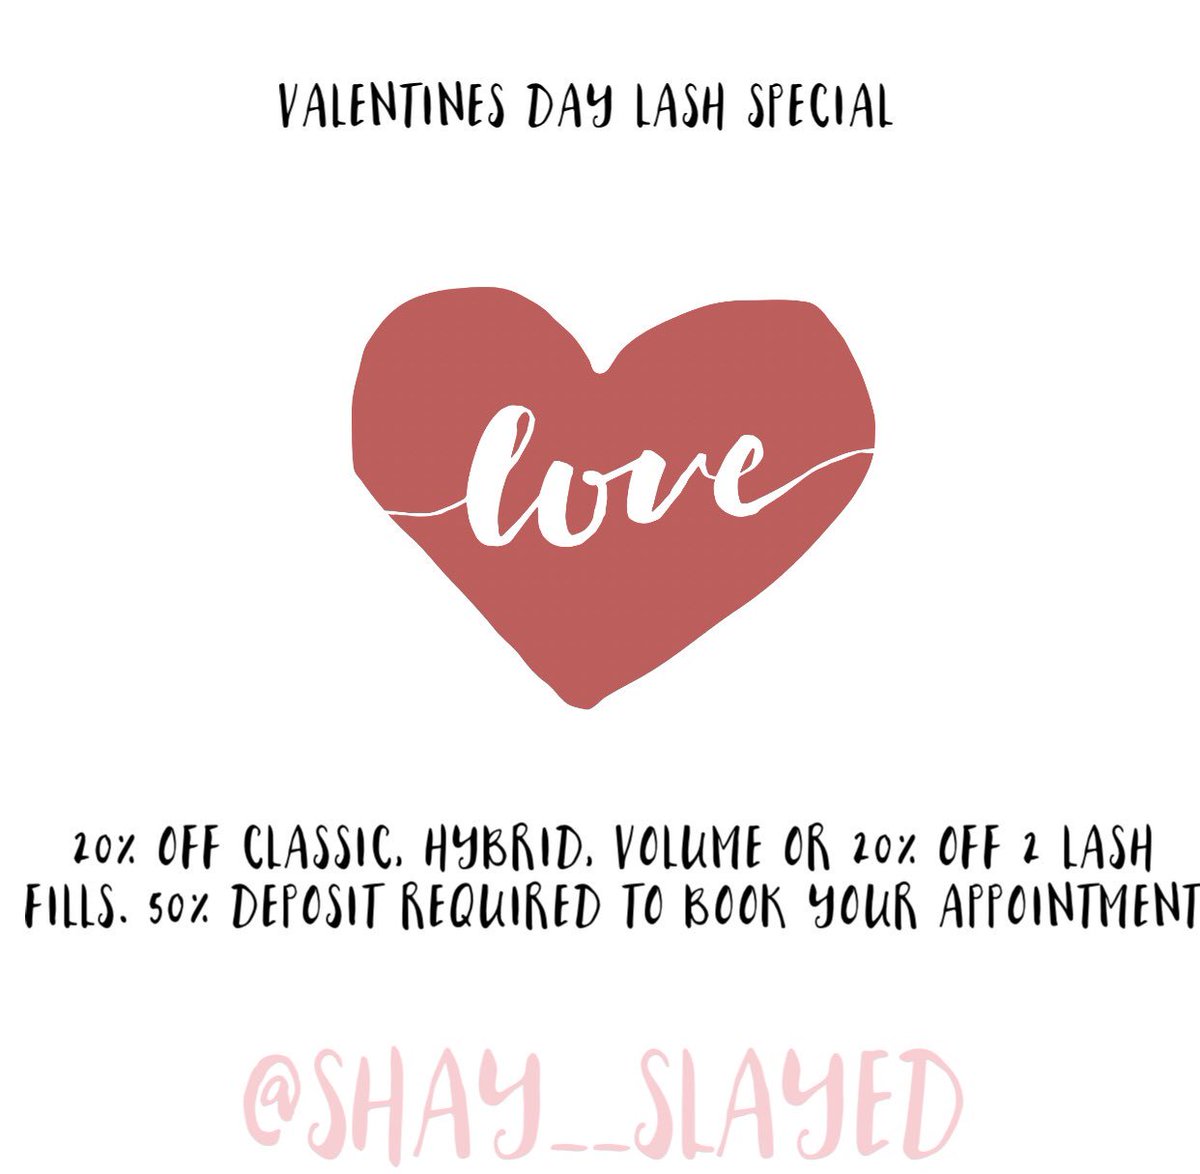 Special ends Sunday the 18th at midnight. Deposit will guarantee the services at a discounted rate for a future date. #lashes #minklashes #dmvlashes #dmvlashesextensions #dclashes #dclashextensions #dmvlashartist #dmvlashtech #dclashtech #dmvlashlady #dmv #lashlady #lashlove